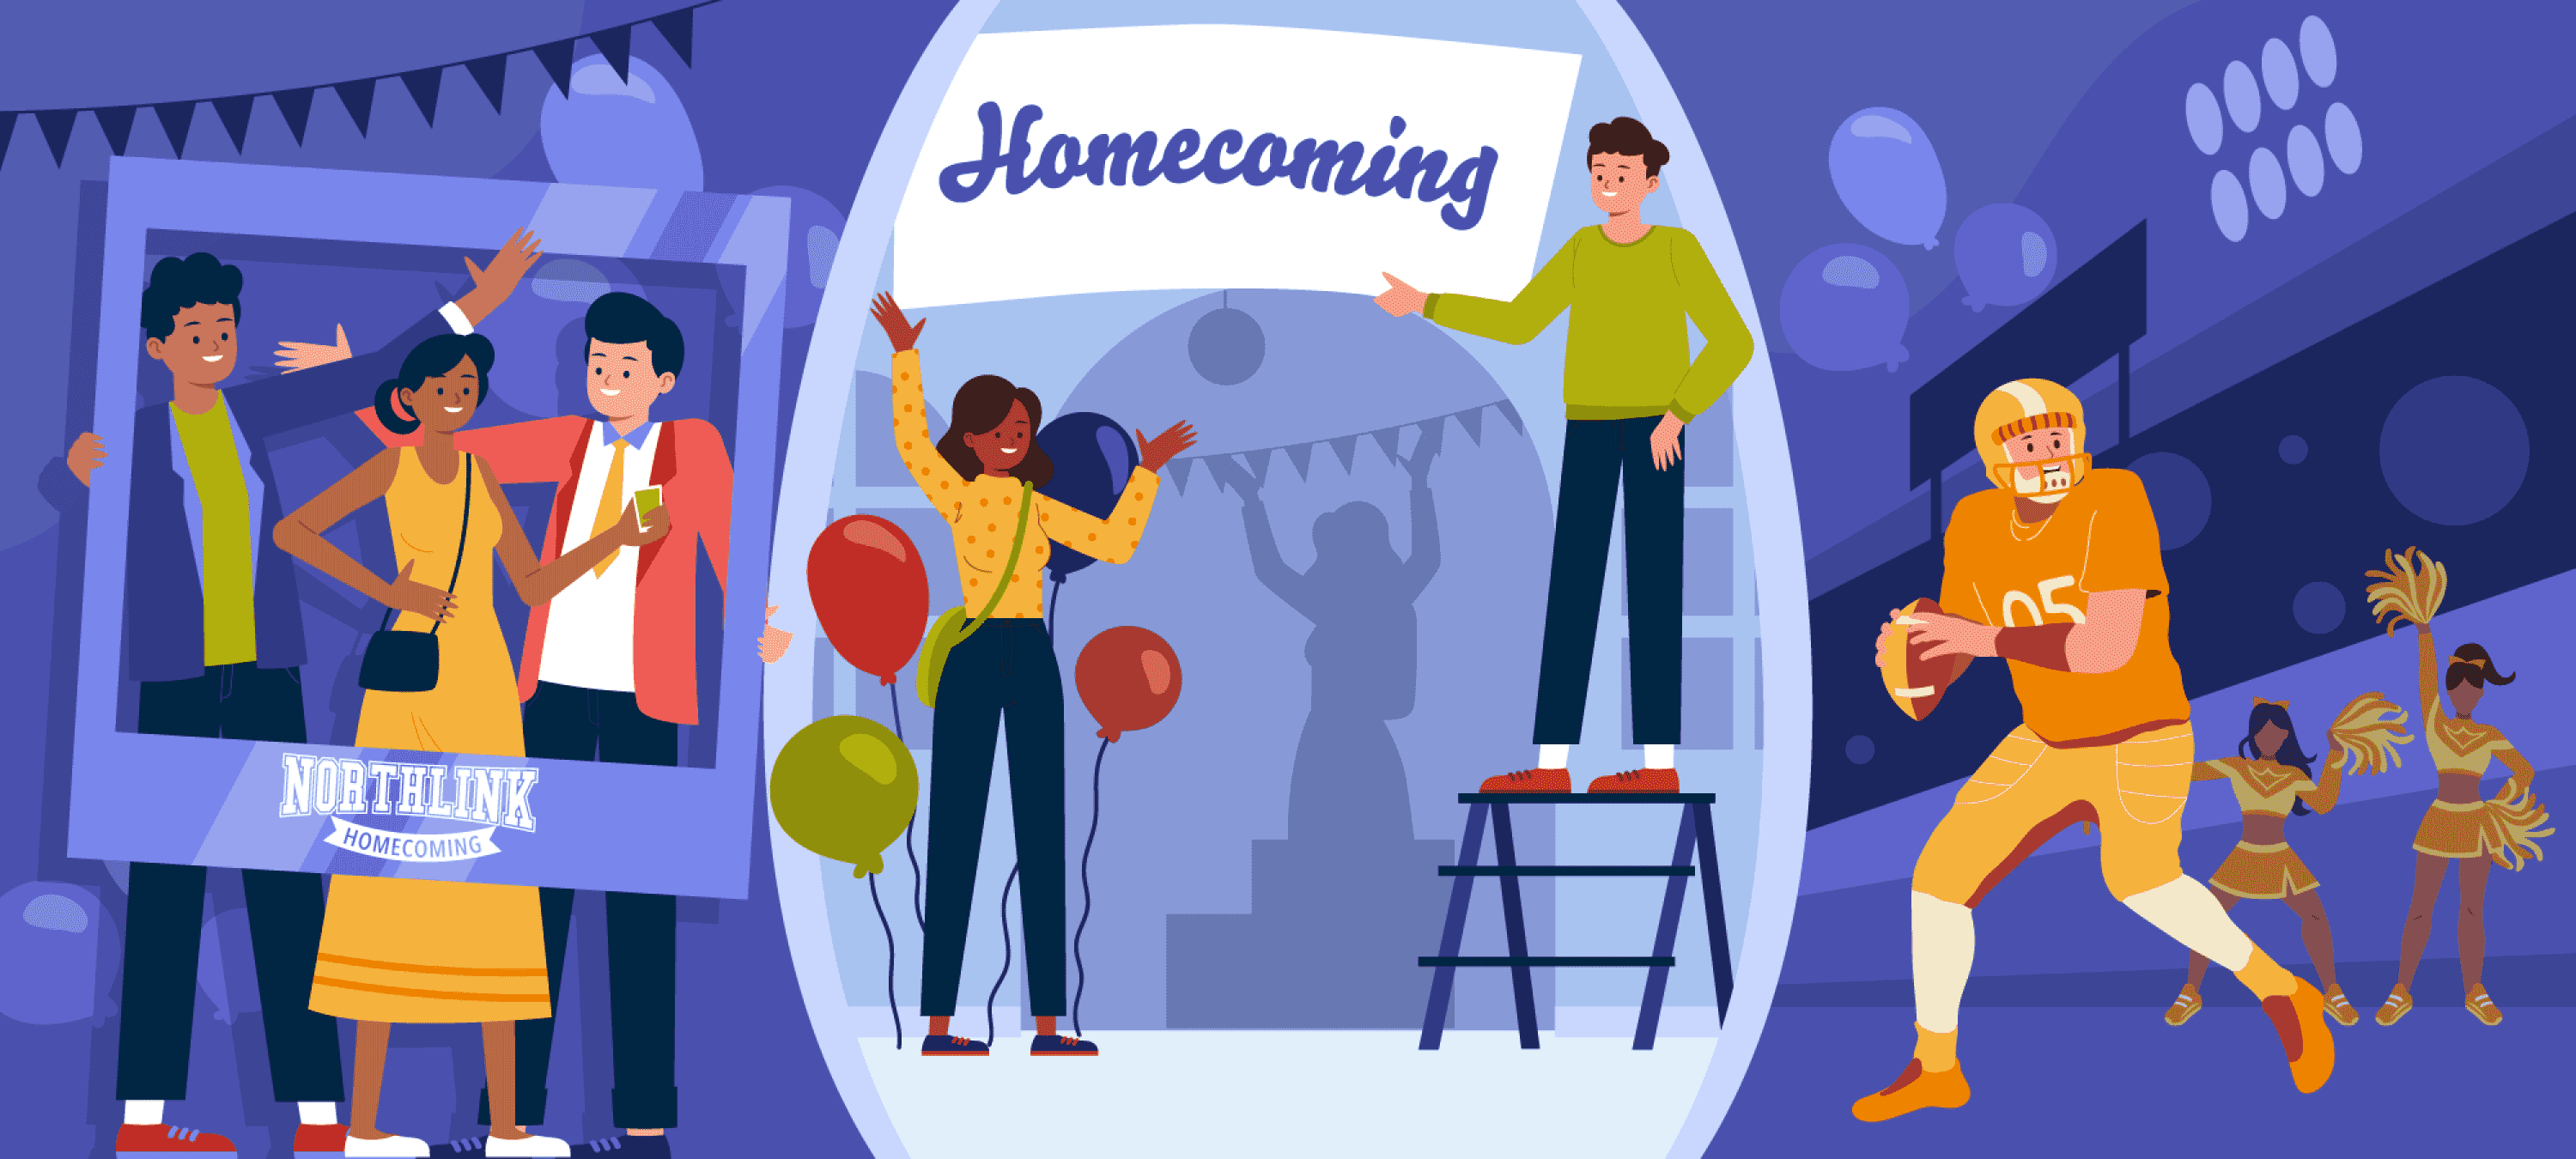 College Homecoming Event Ideas from Welcoming Alumni to Boosting School Spirit